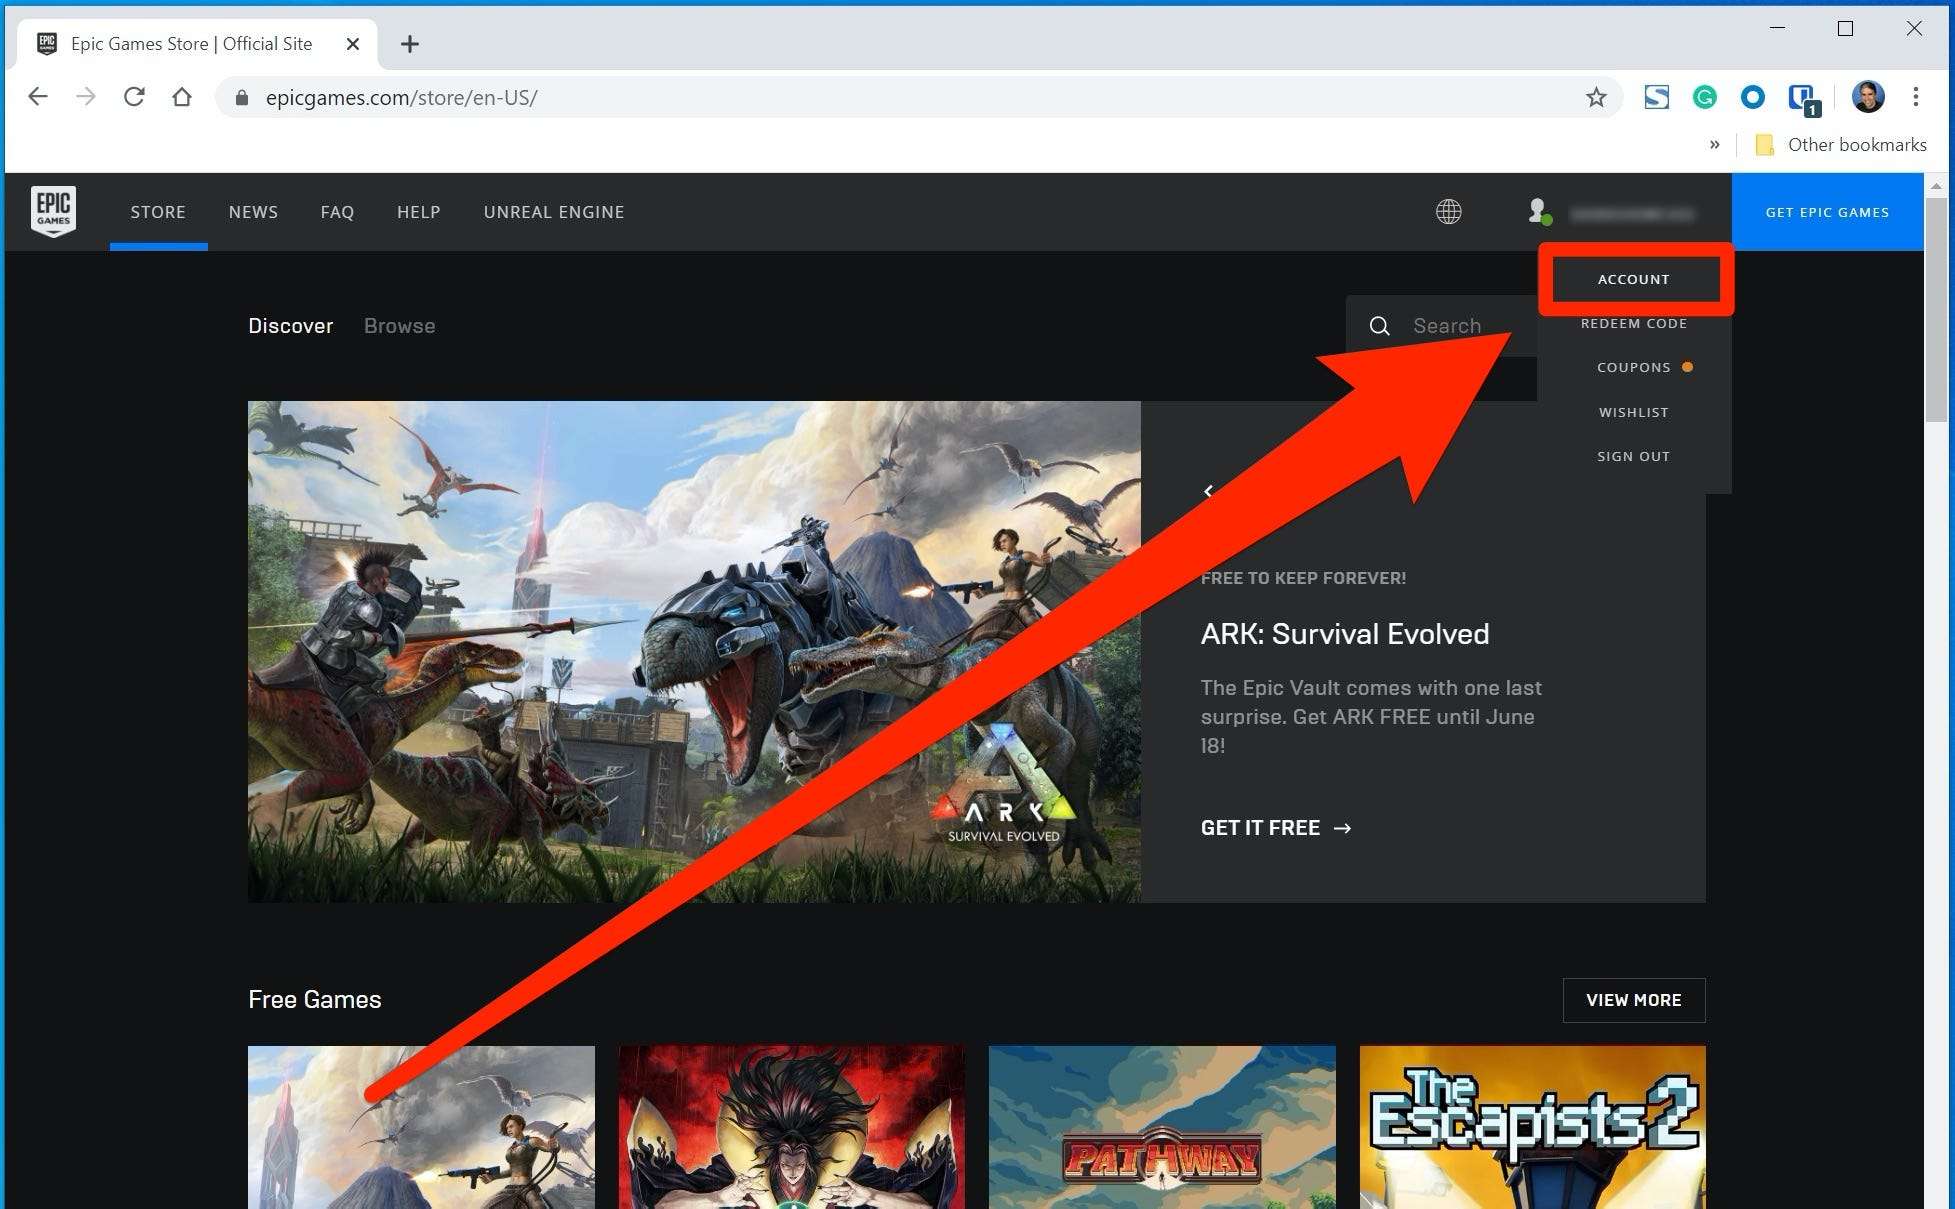 windows store recognizing game pass